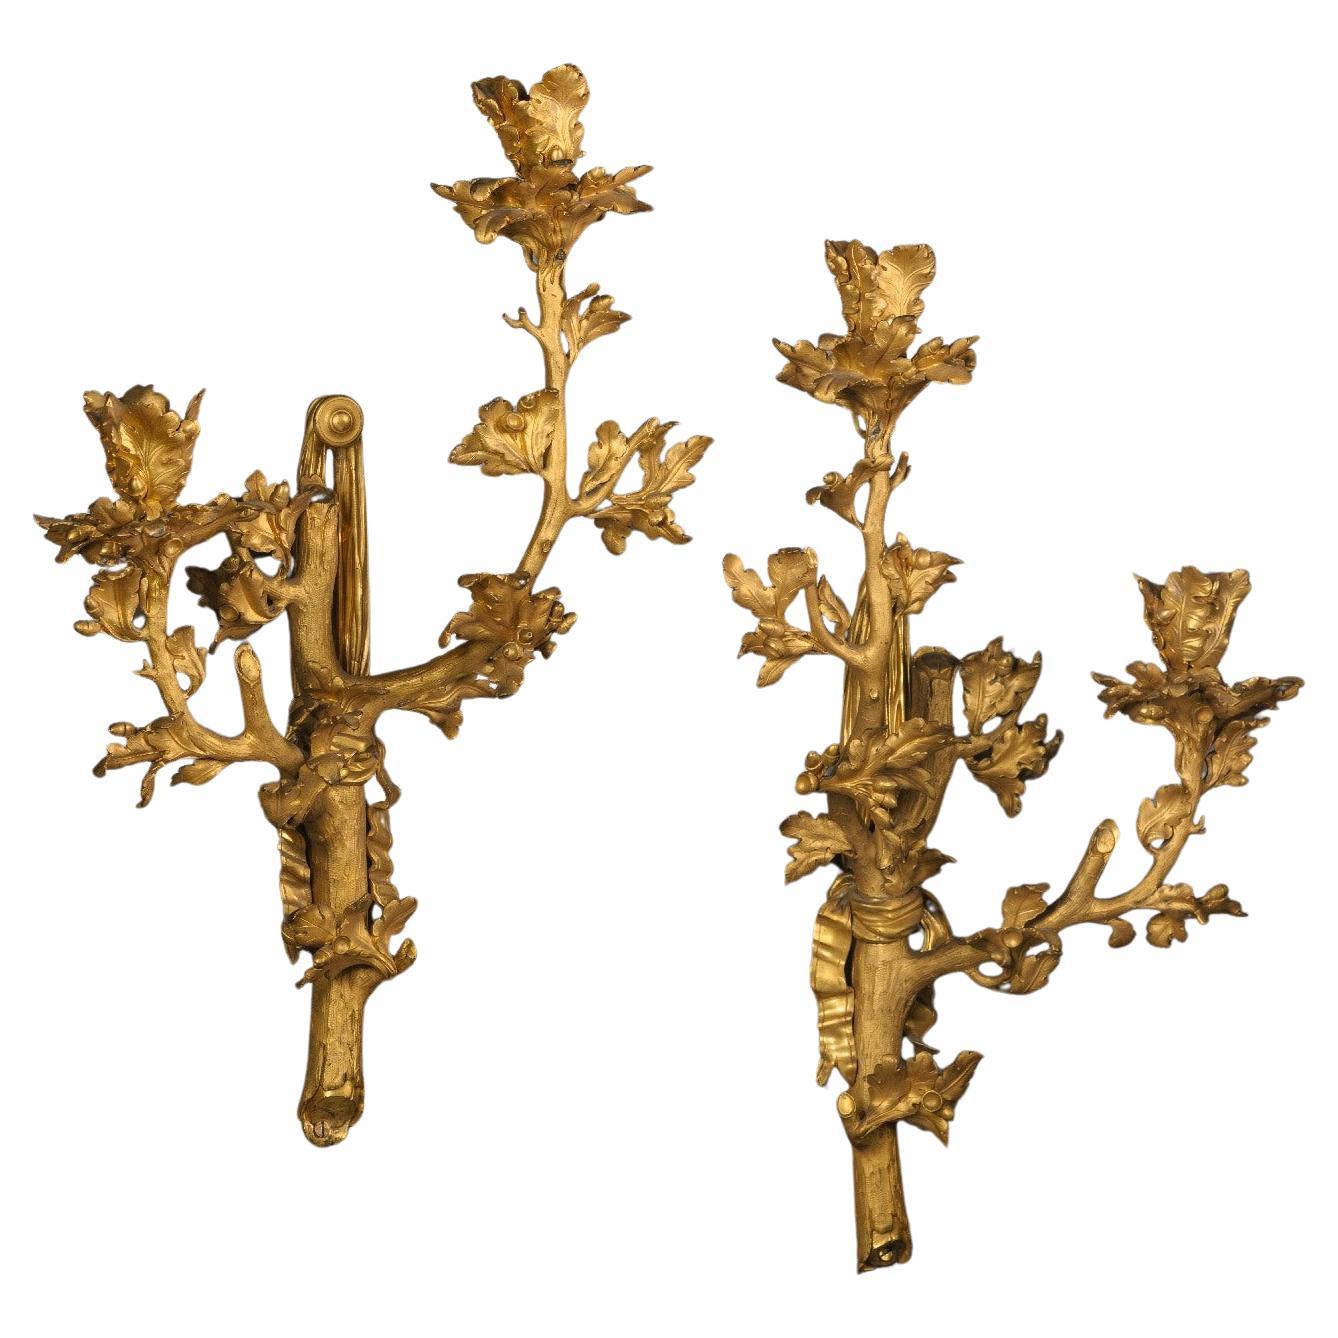 A Rare and Highly Unusual Pair of Gilt-Bronze Twin-Light Wall Appliques For Sale